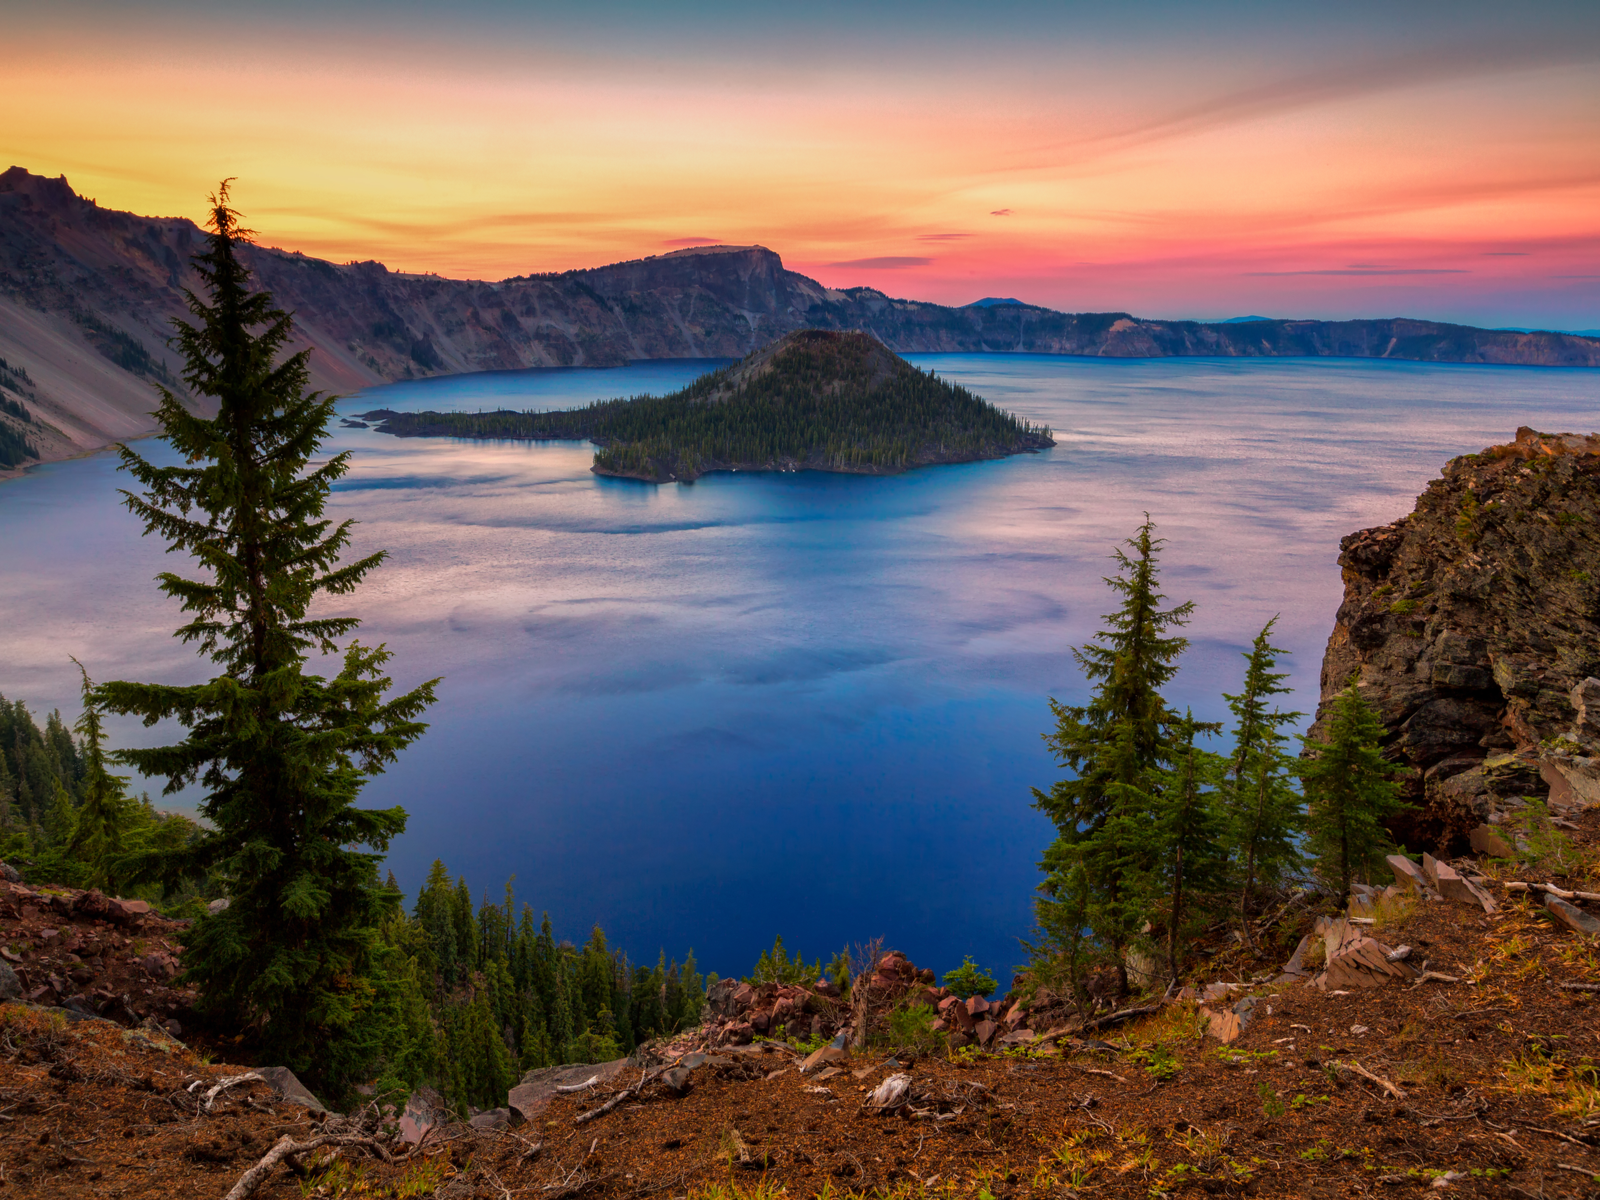 Sunset over the calm waters surrounding a detached portion of land at Crater Lake National Park in Oregon, one of the most beautiful places in the US